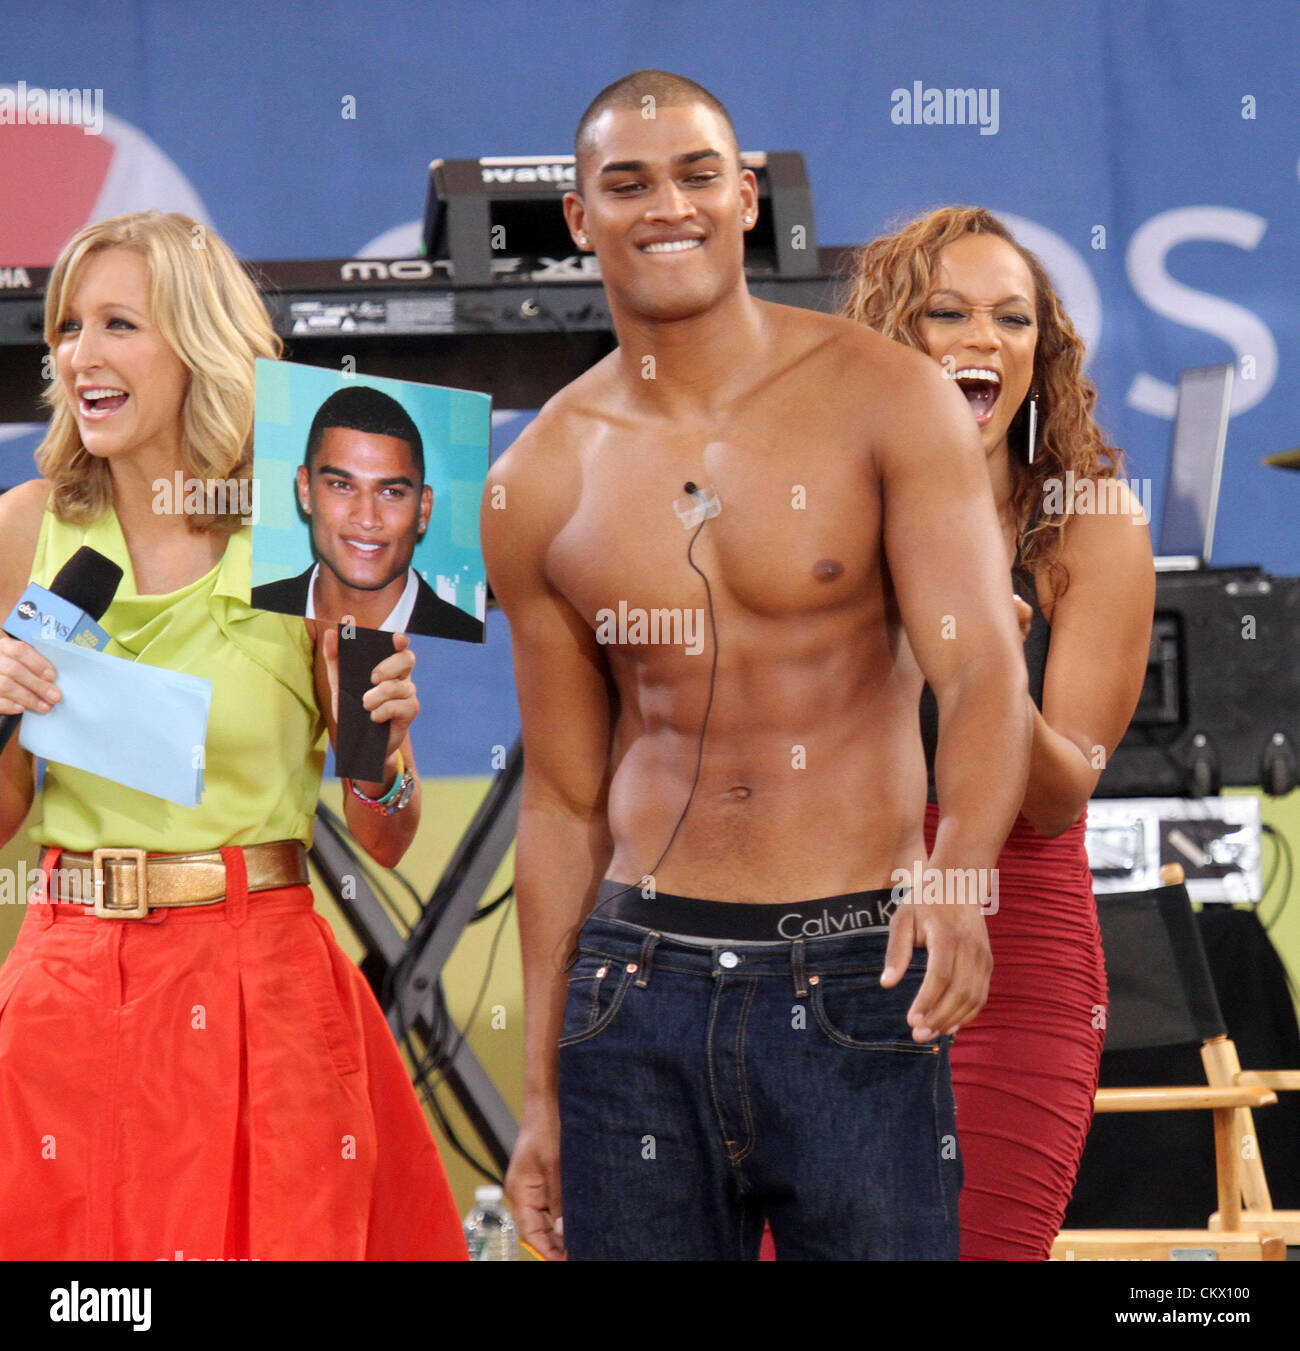 Aug. 24, New York, New York, U.S. 'GMA' co-host LARA SPENCER, former model TYRA and male model ROB EVANS promote 'America's Next Top Model Cycle 19' on 'Good